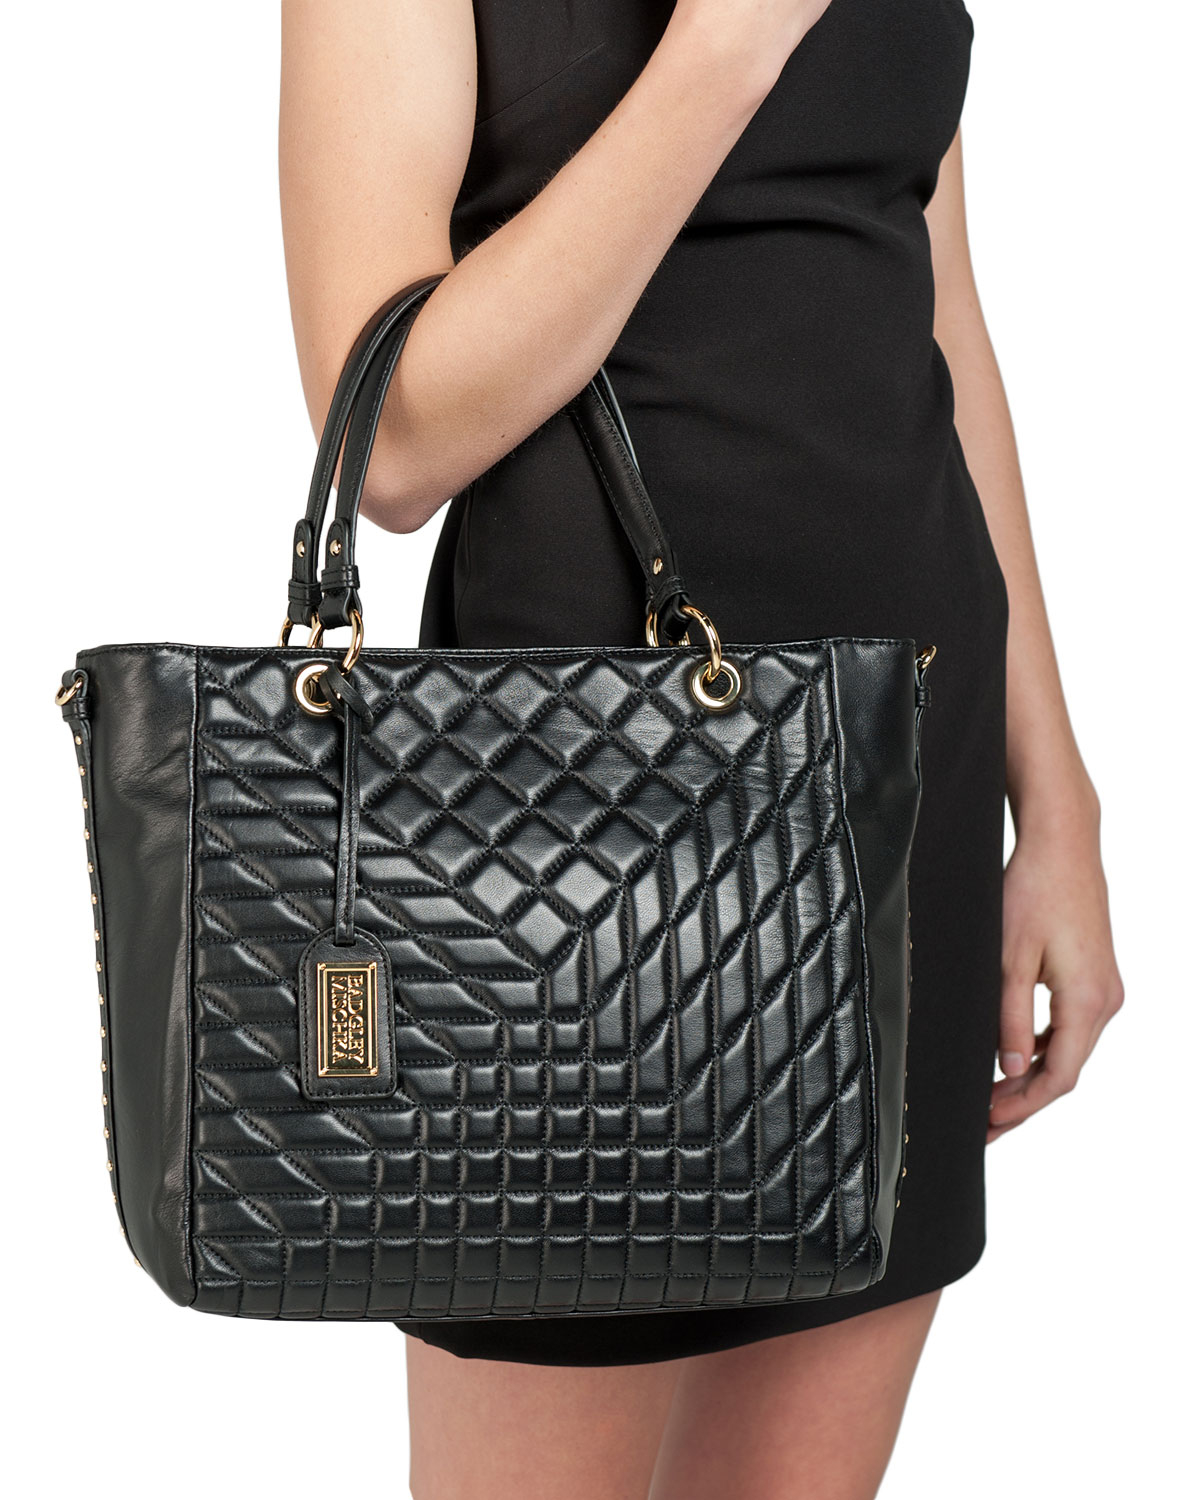 Badgley mischka Clarissa Quilted Leather Tote in Black | Lyst